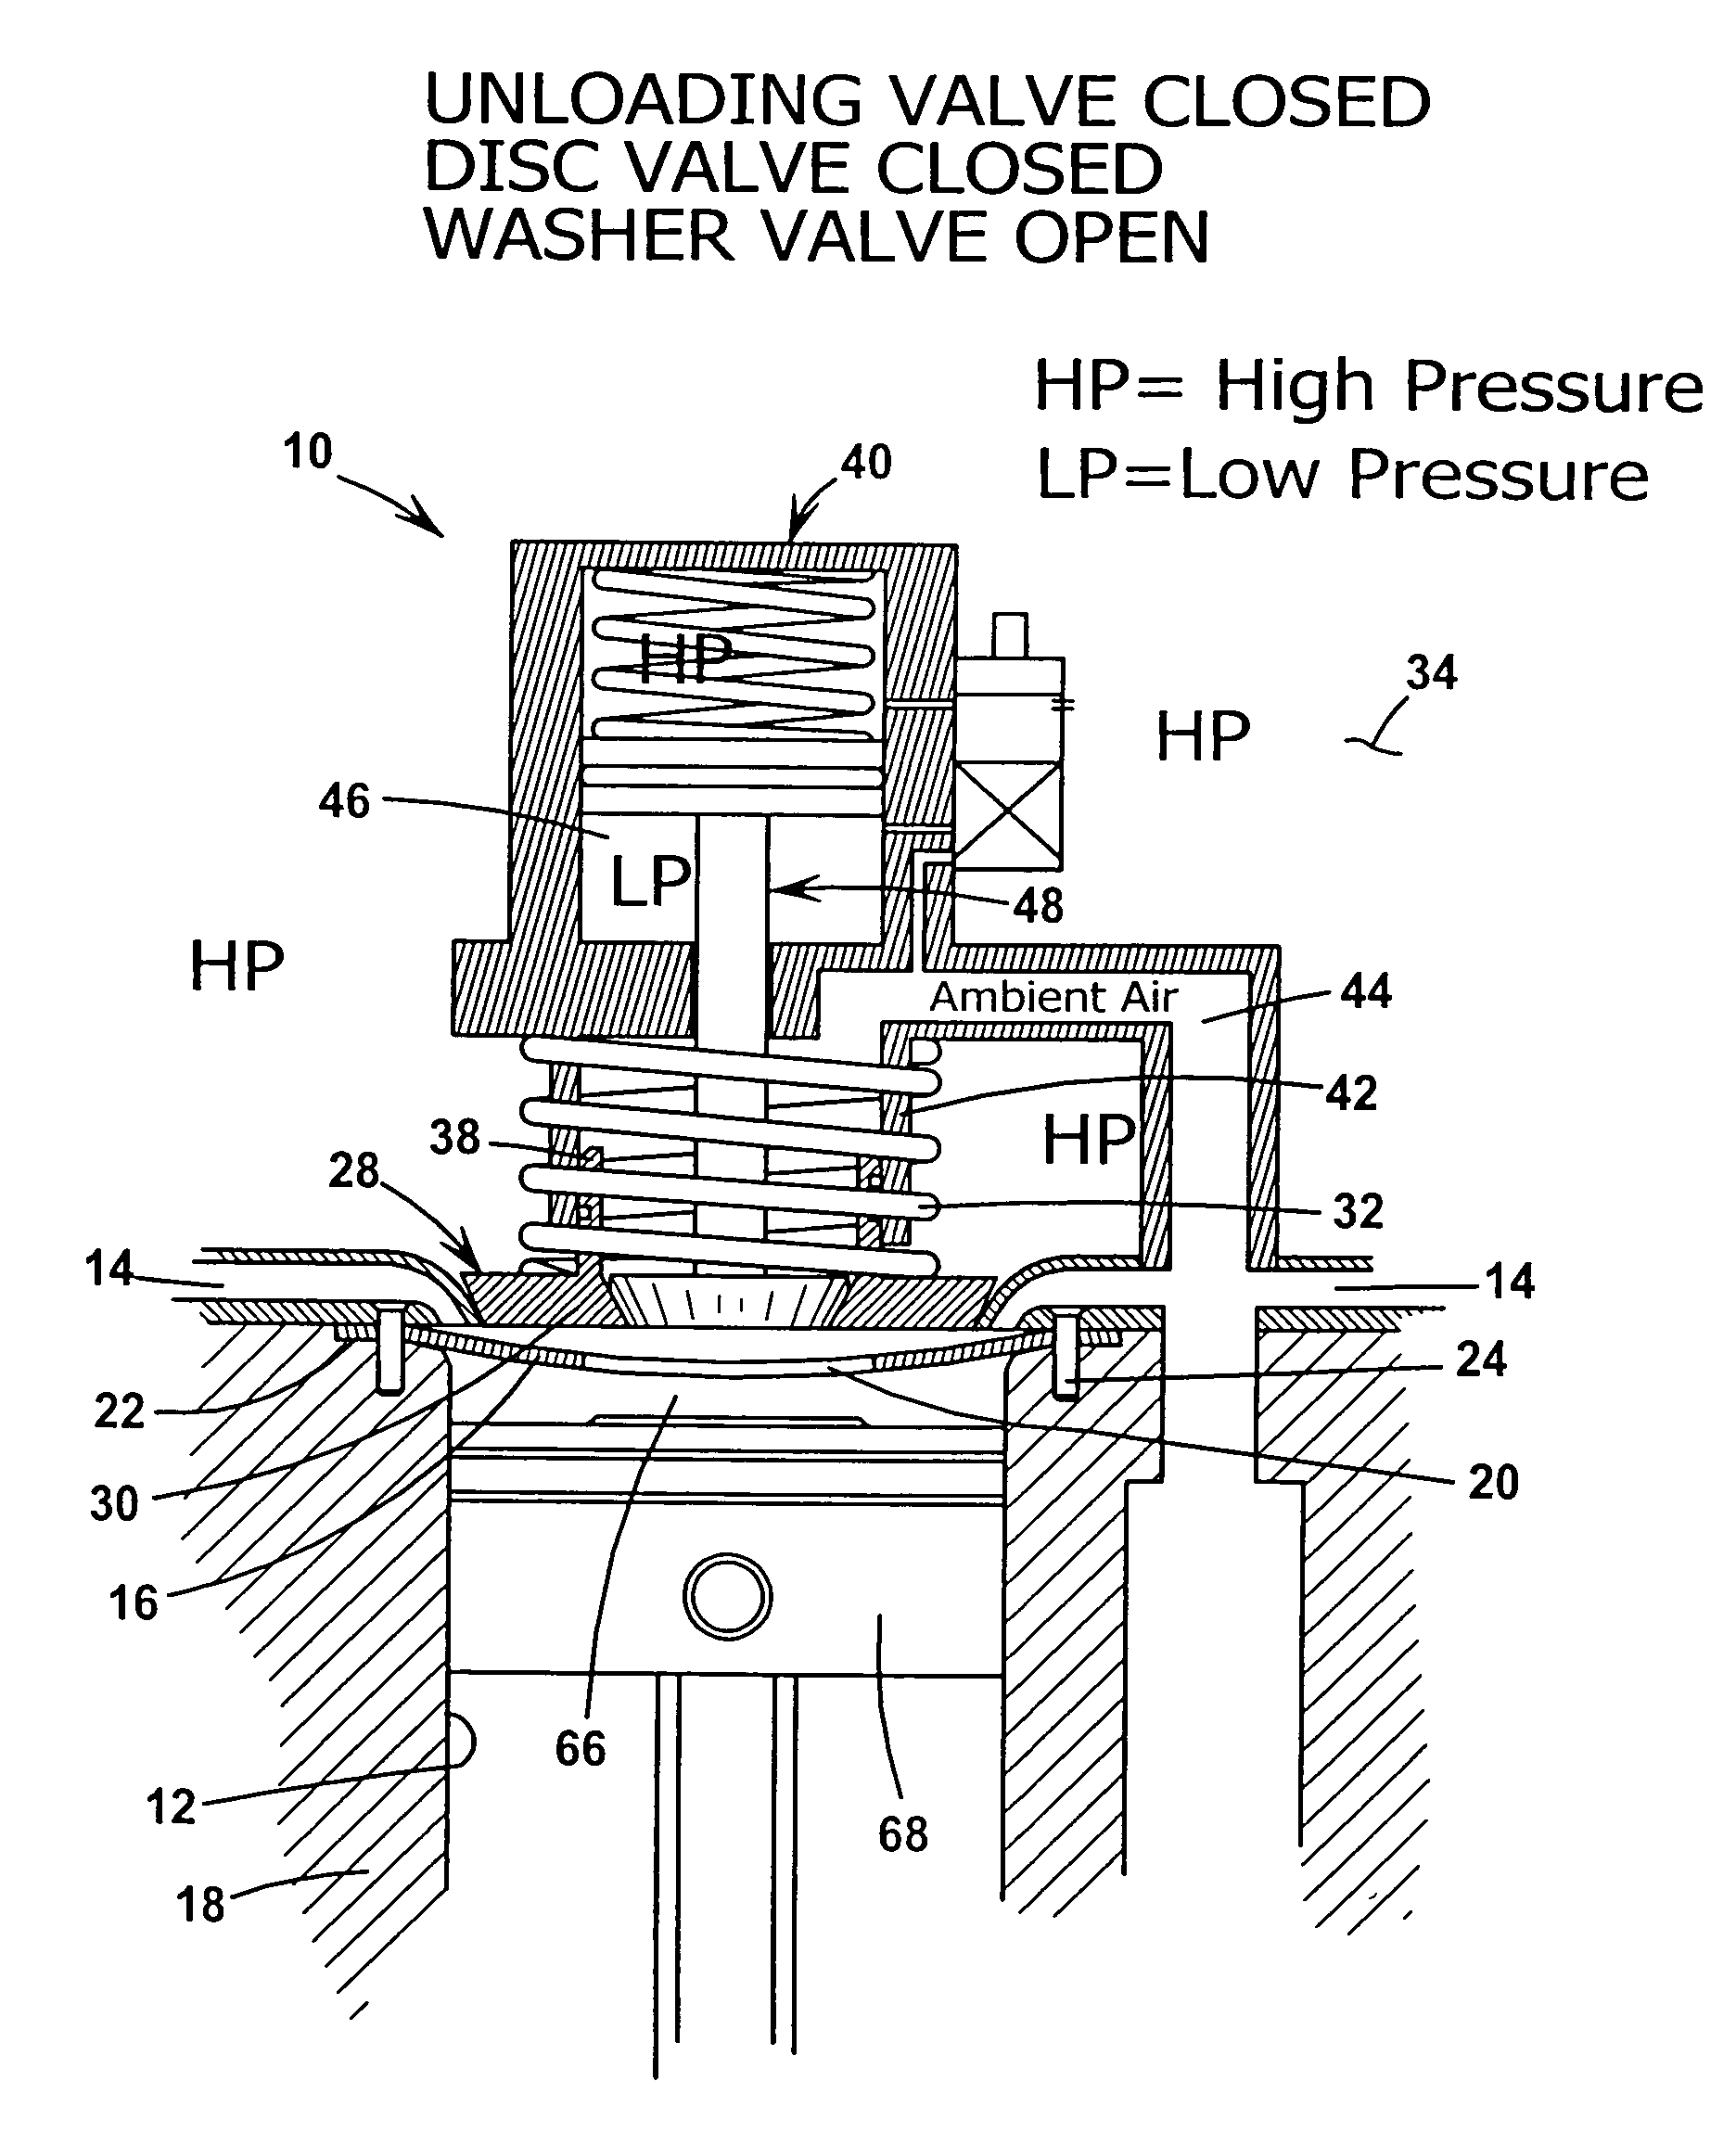 Split-cycle engine with disc valve